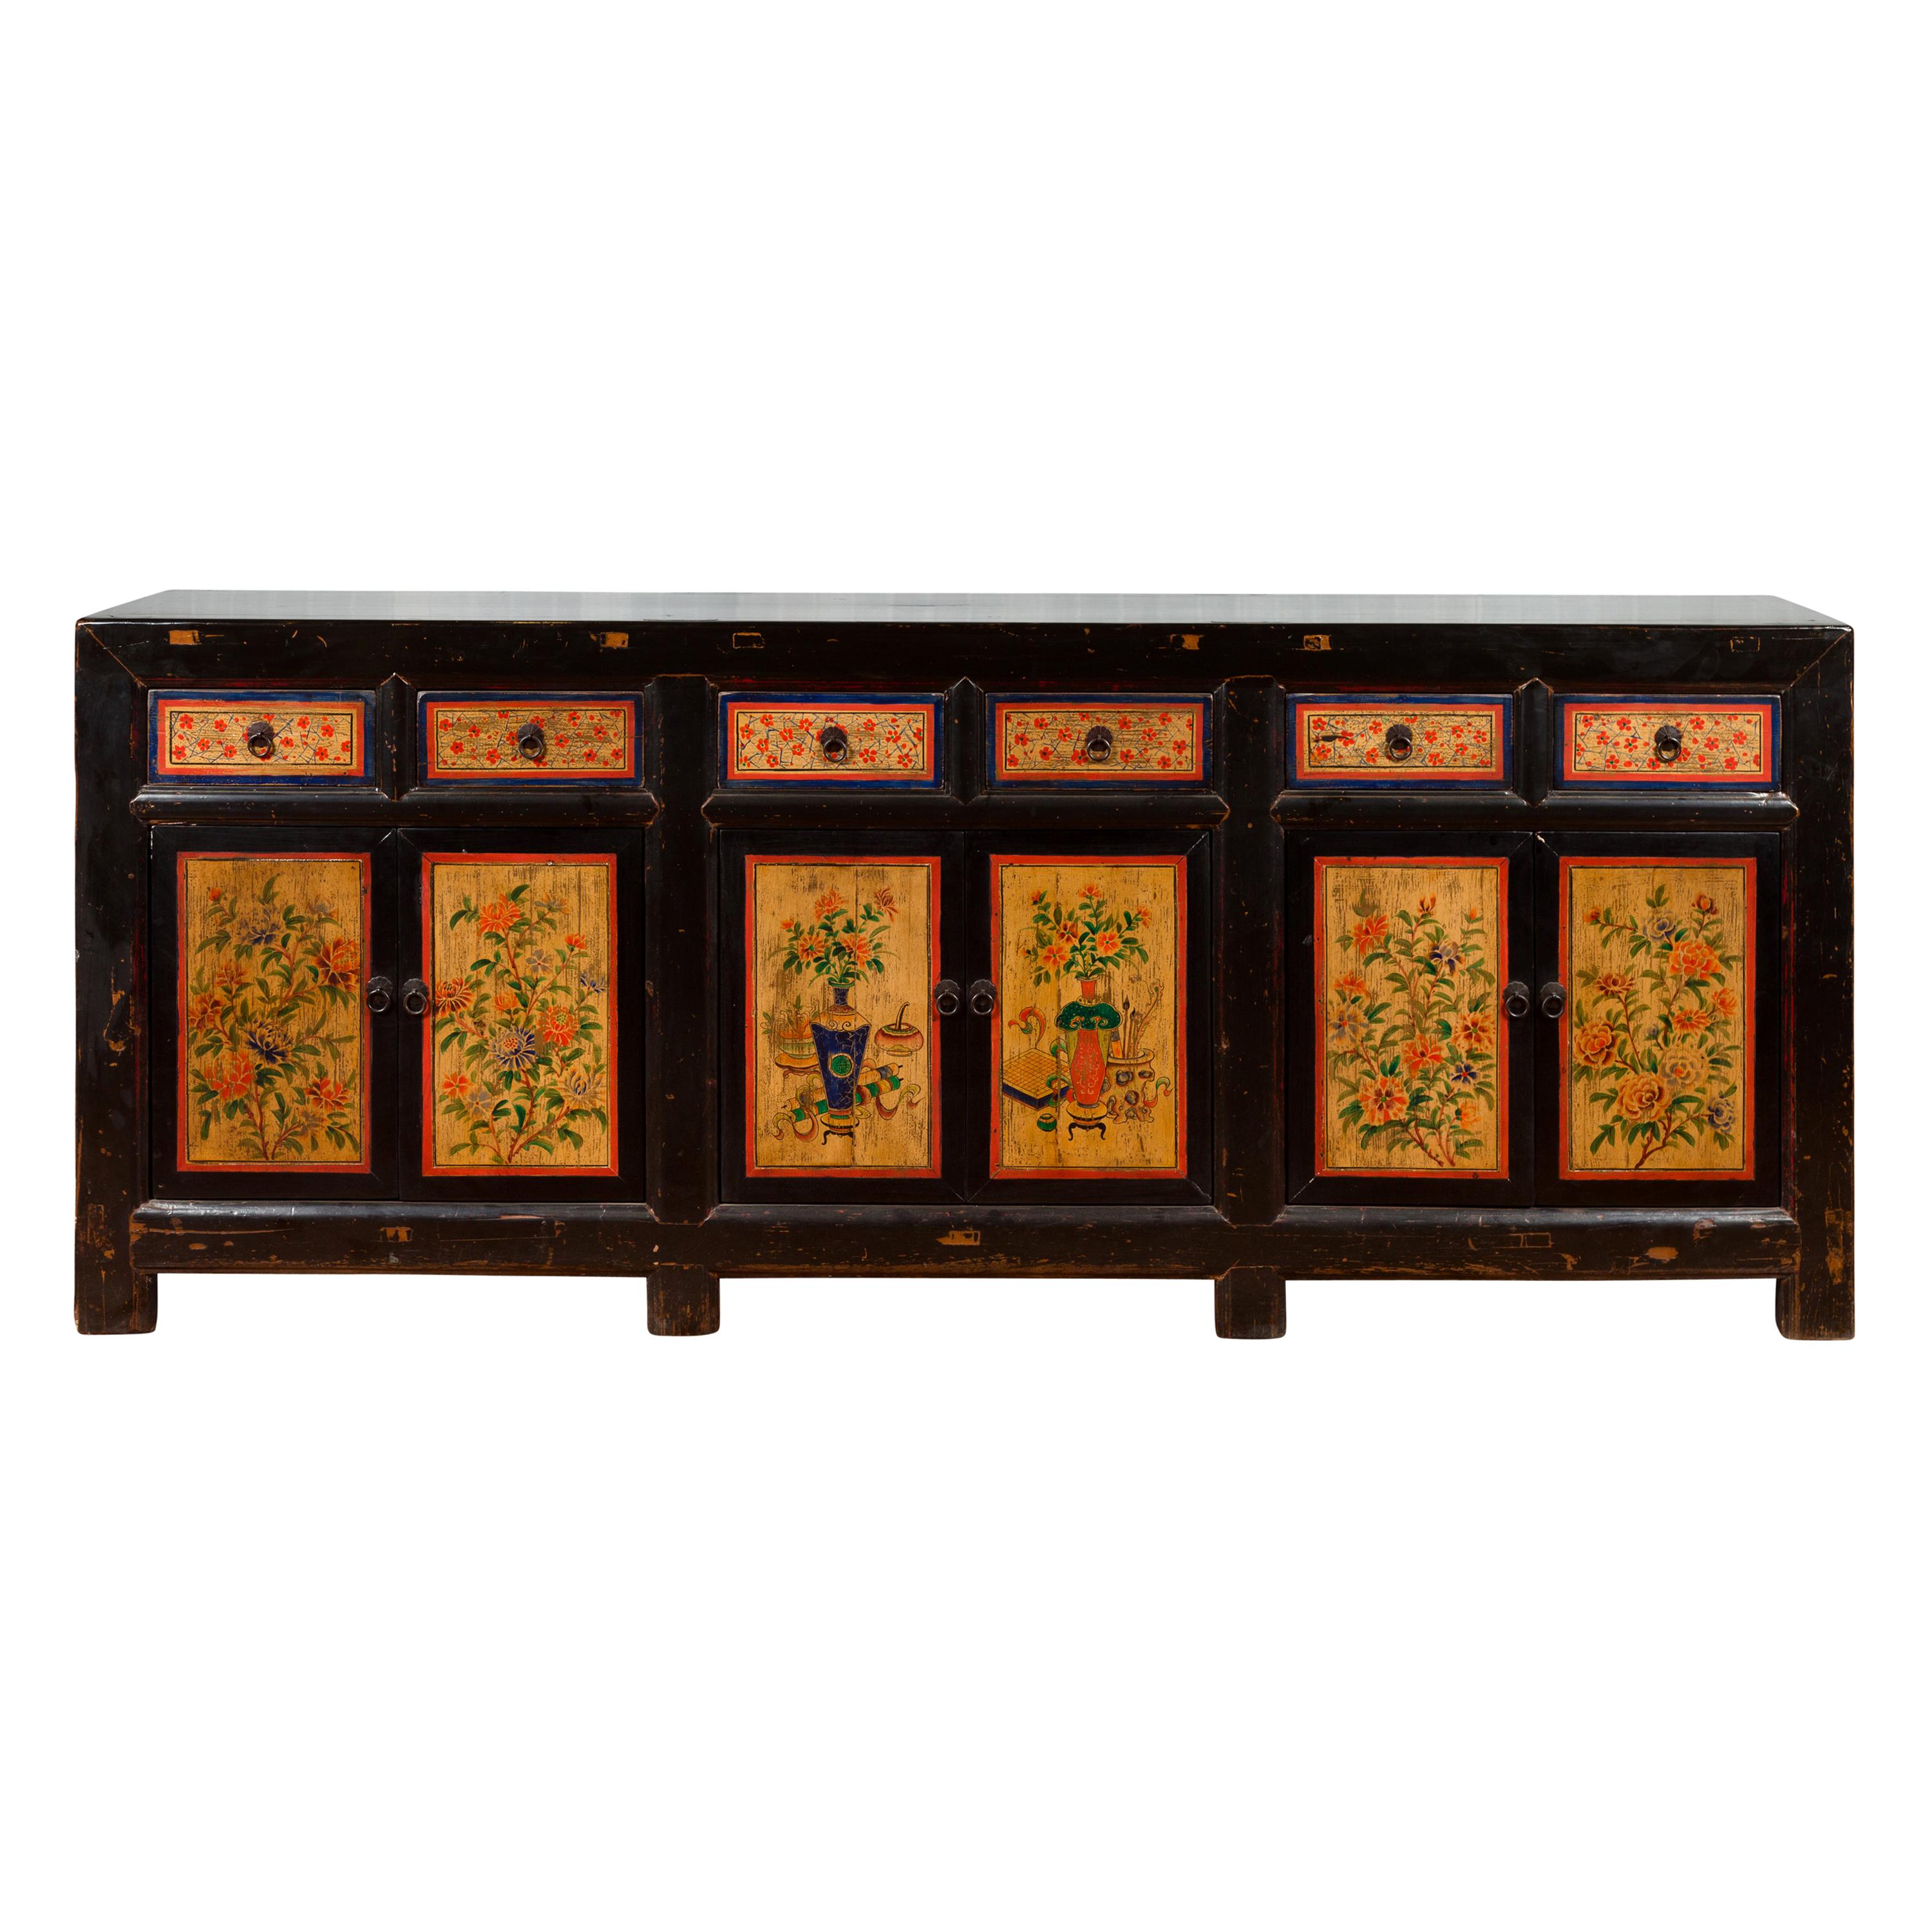 Antique Chinese Black Lacquered Gansu Sideboard with Hand Painted Floral Motifs